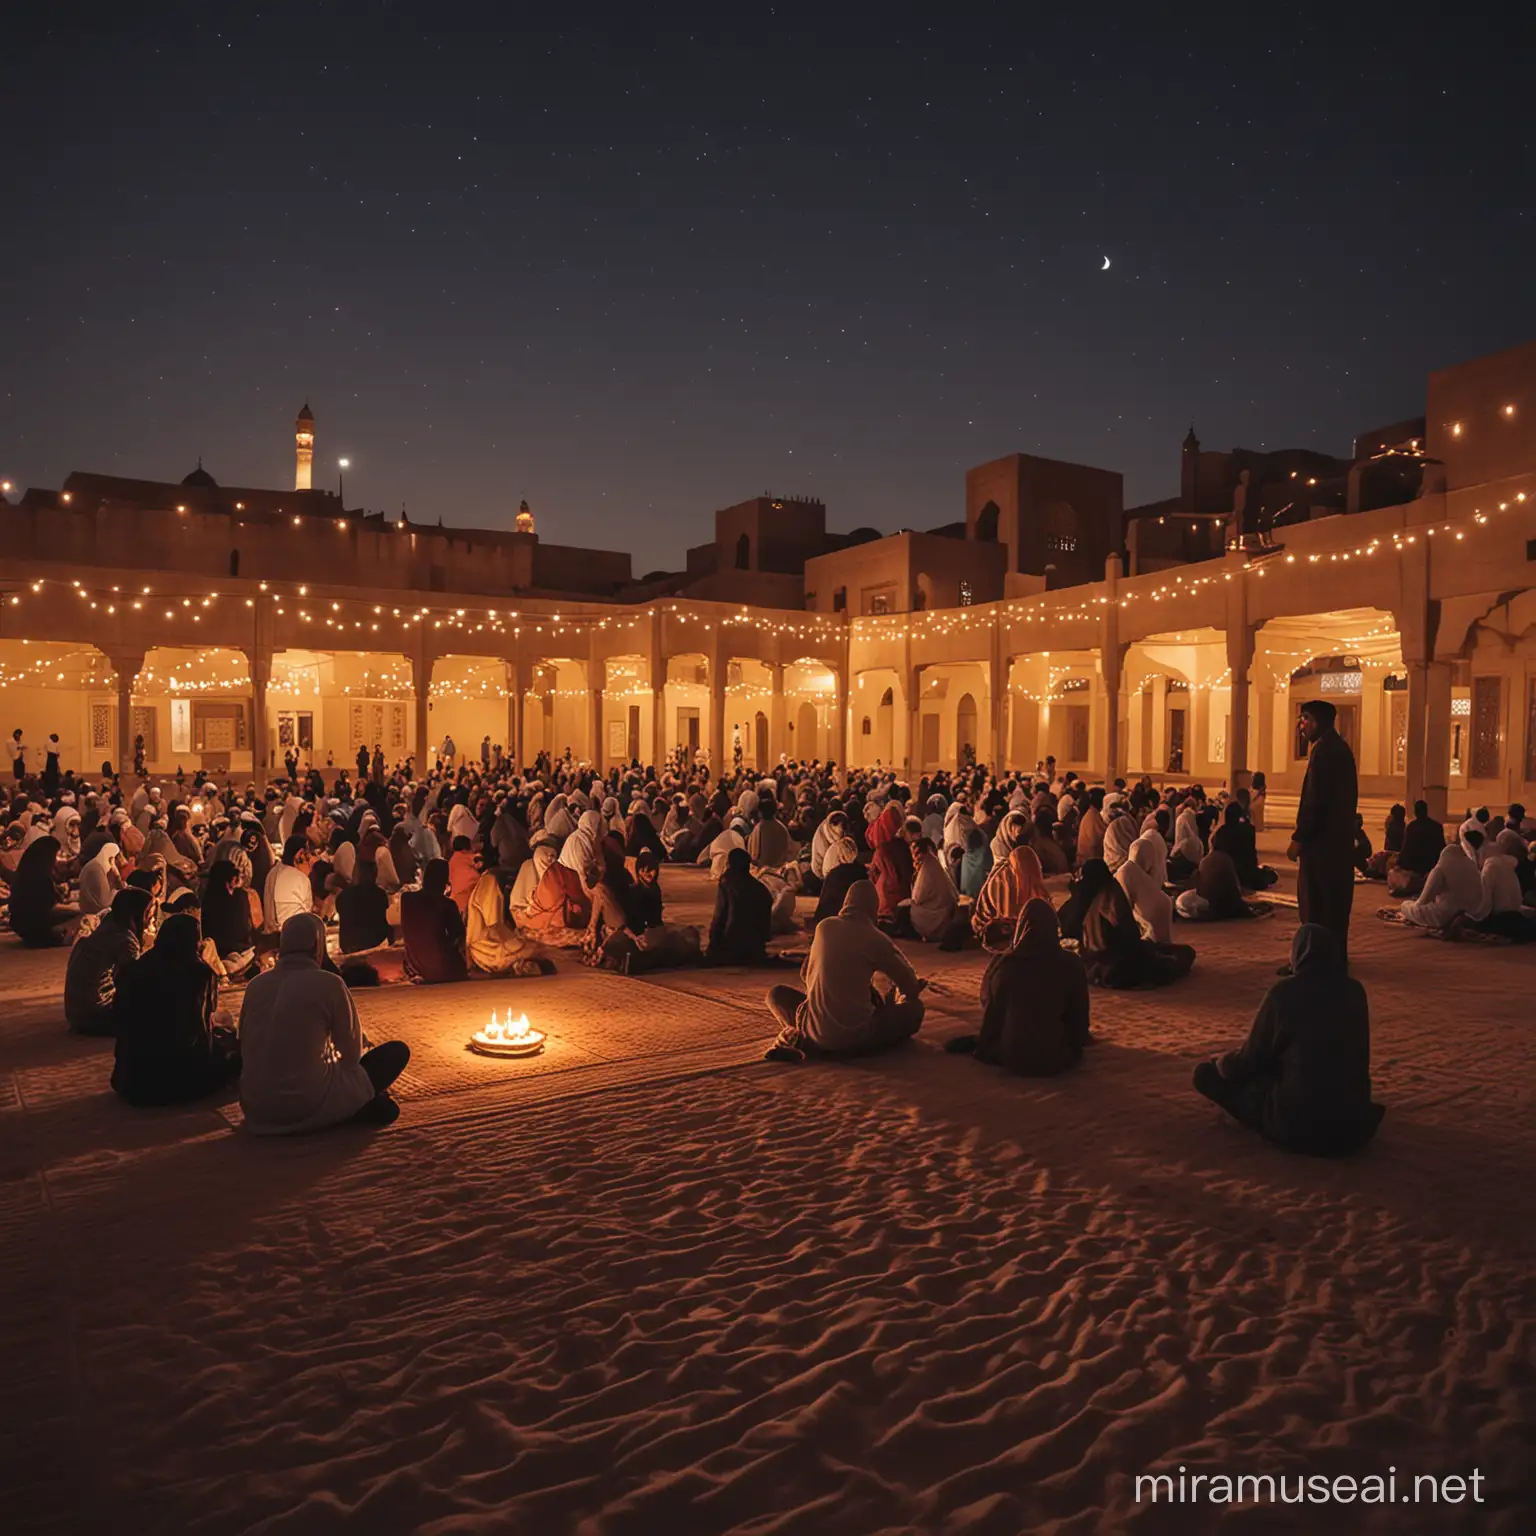 The tranquility of Ramadan illuminated by soft lantern light, capturing the serenity, spirituality, and community gathering with a wide-angle lens during the evening, in a warm and inviting style, reminiscent of traditional film photography --ar 4:5